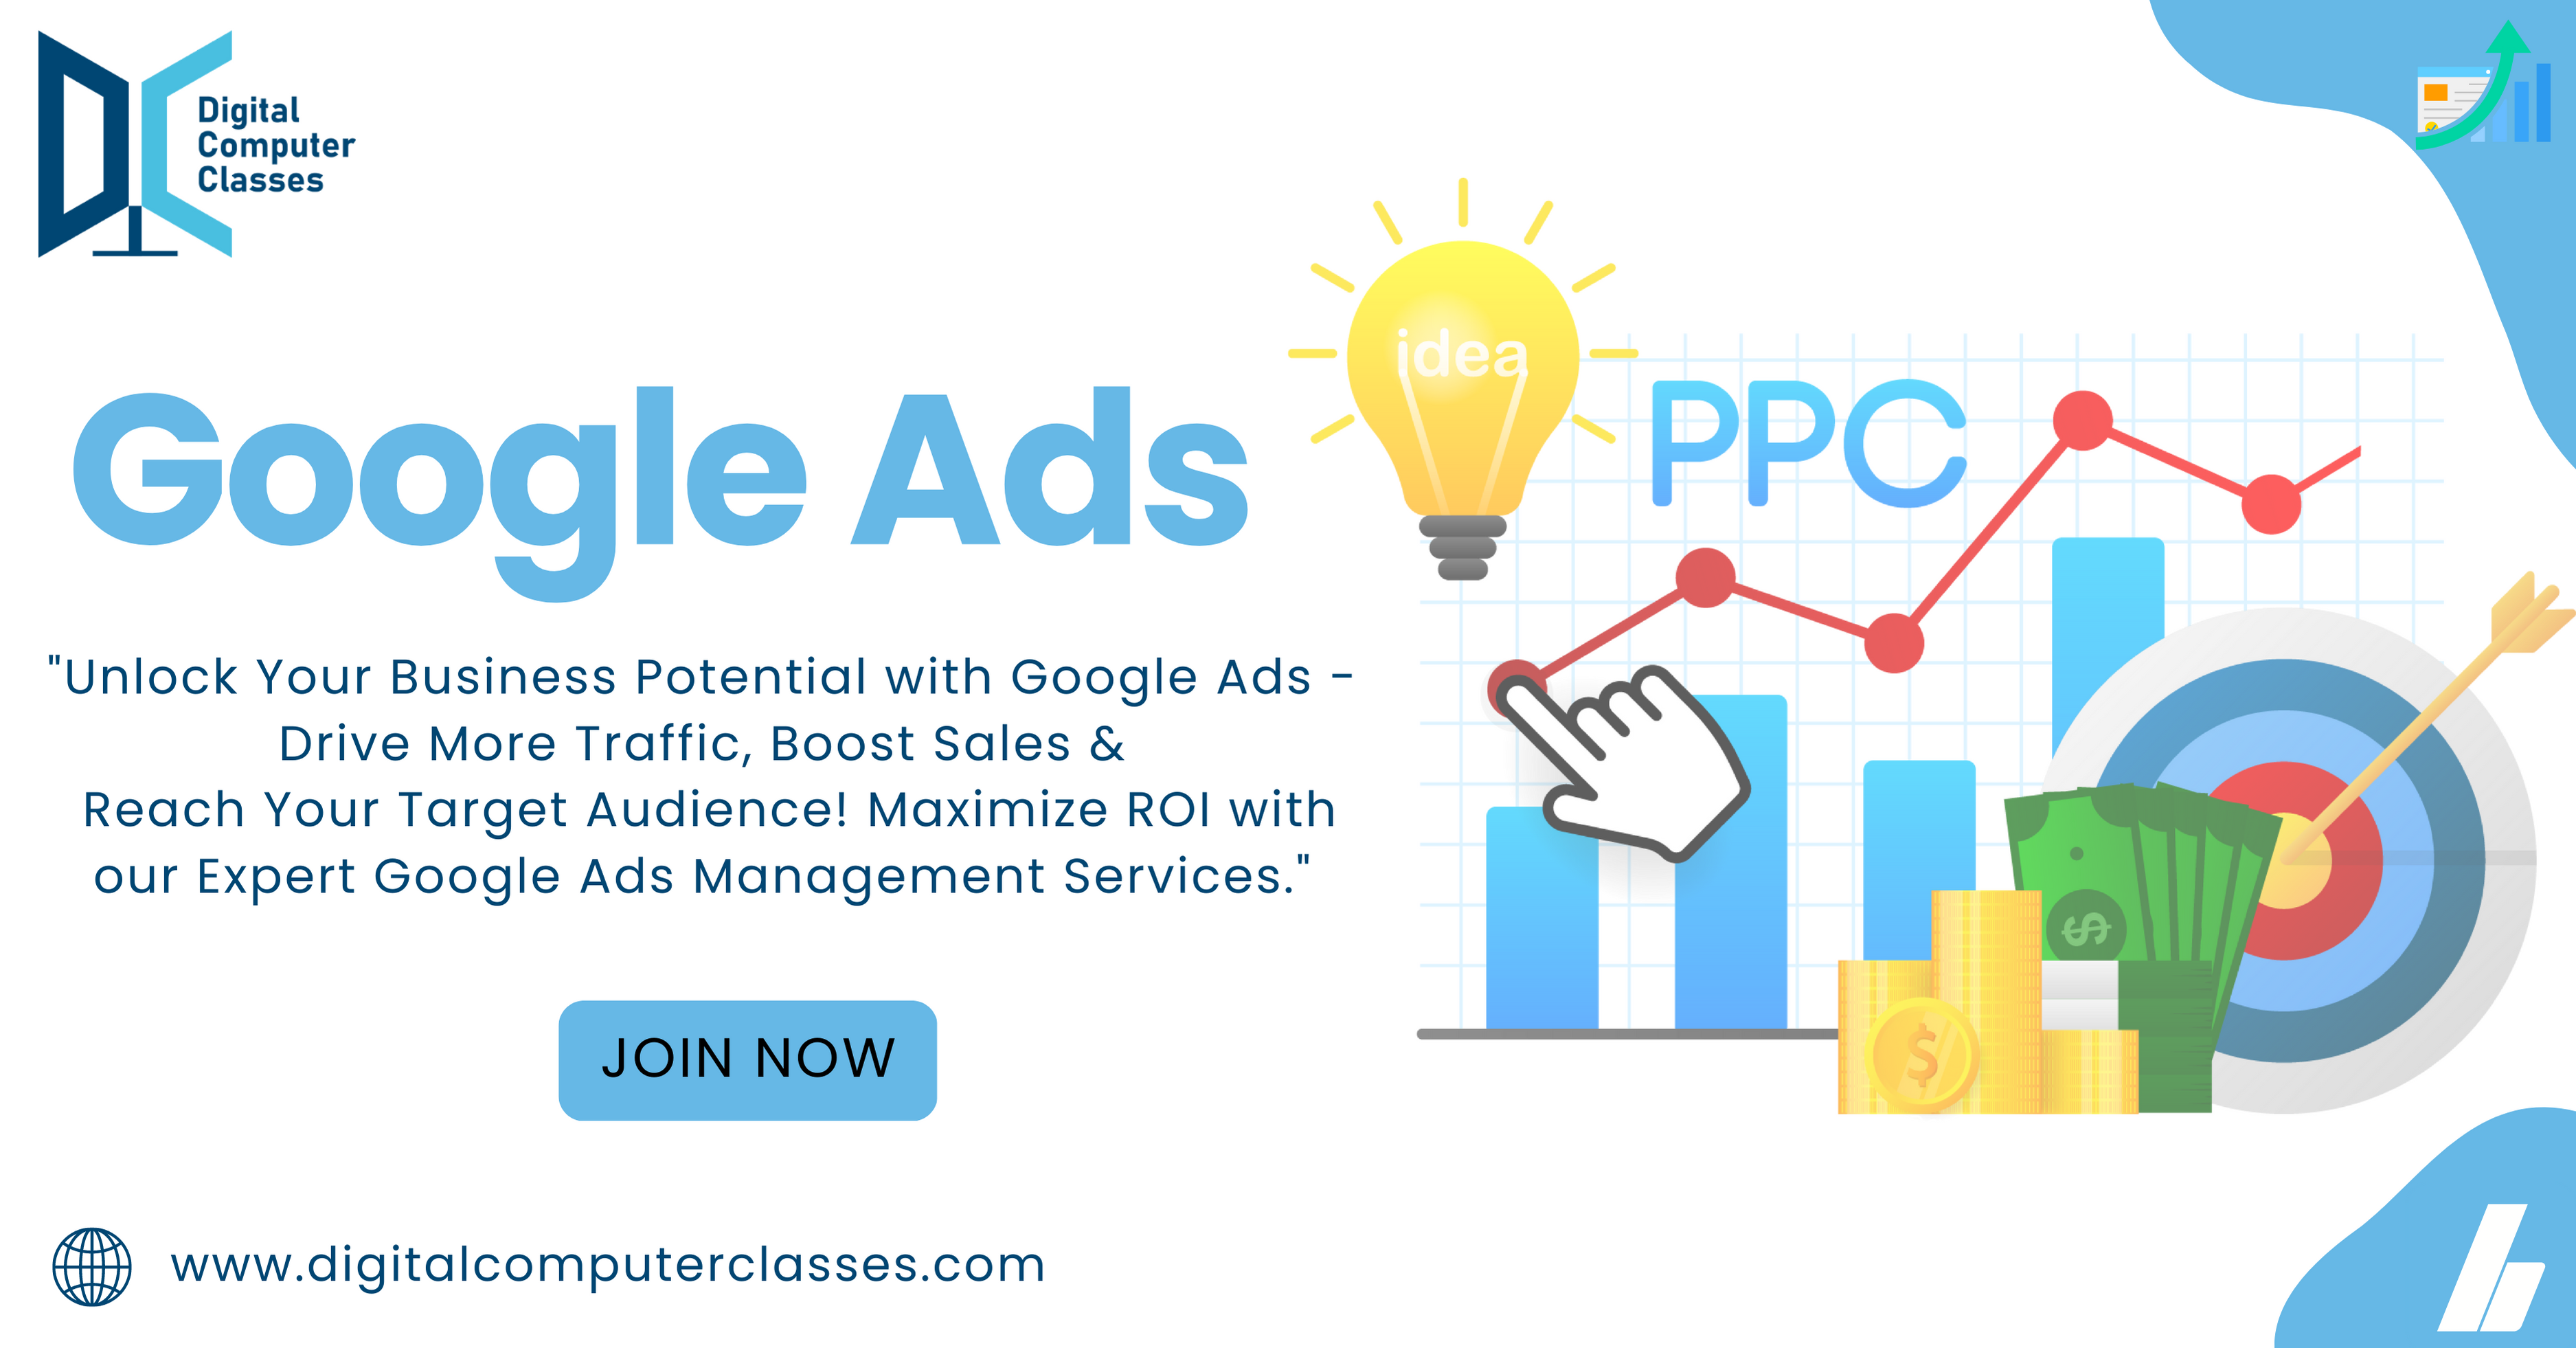 Pay-Per-Click (PPC) Advertising Can Boost Your Business ROI